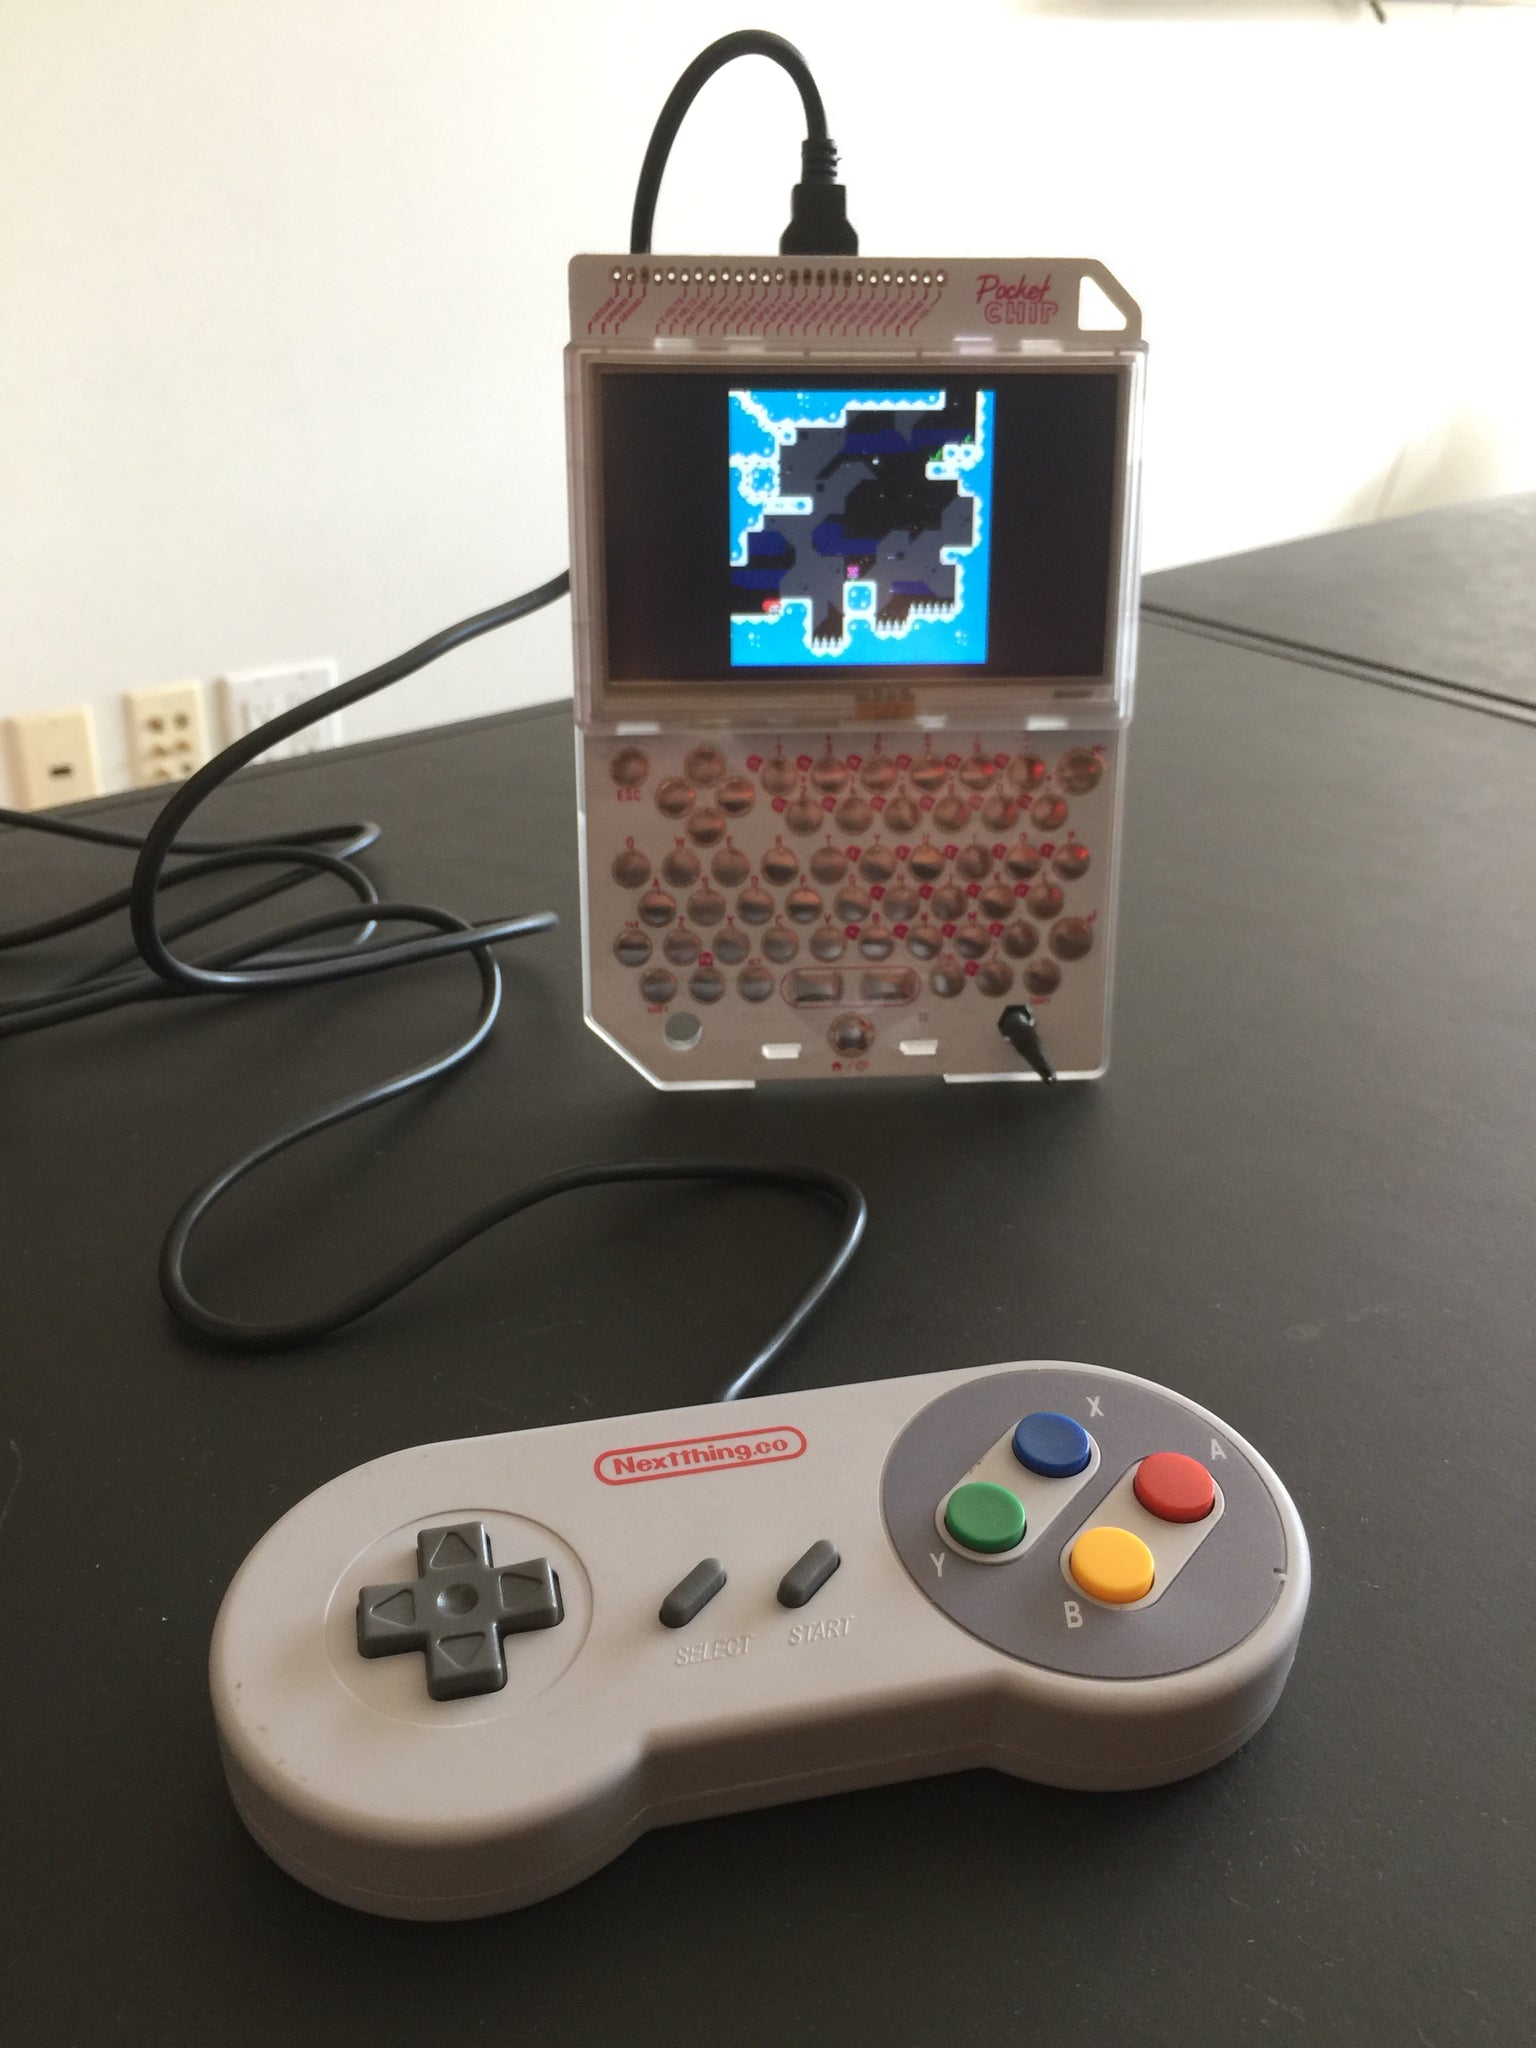 ausretrogamer on X: Being able to play PICO-8 games on the Xbox